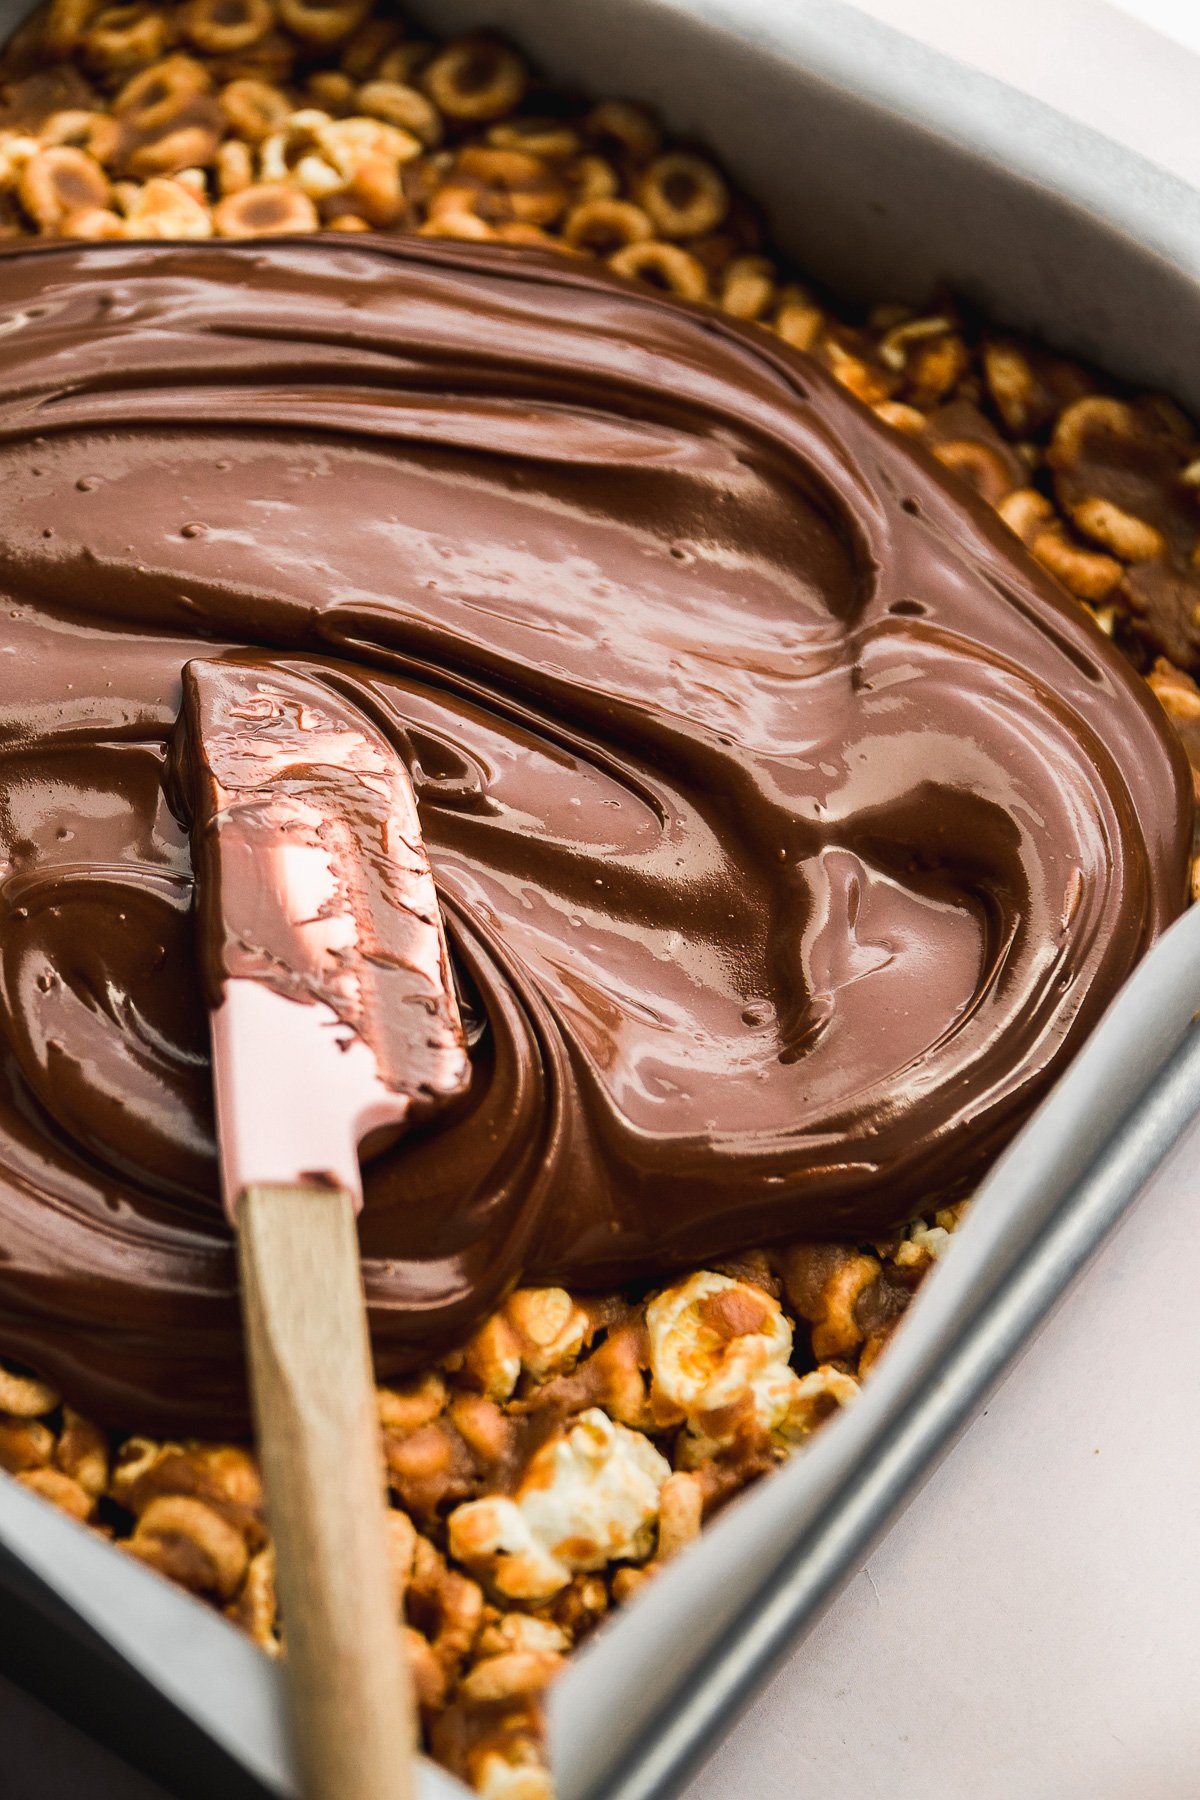 Rubber spatula spreading melted chocolate over peanut butter cheerio bars.